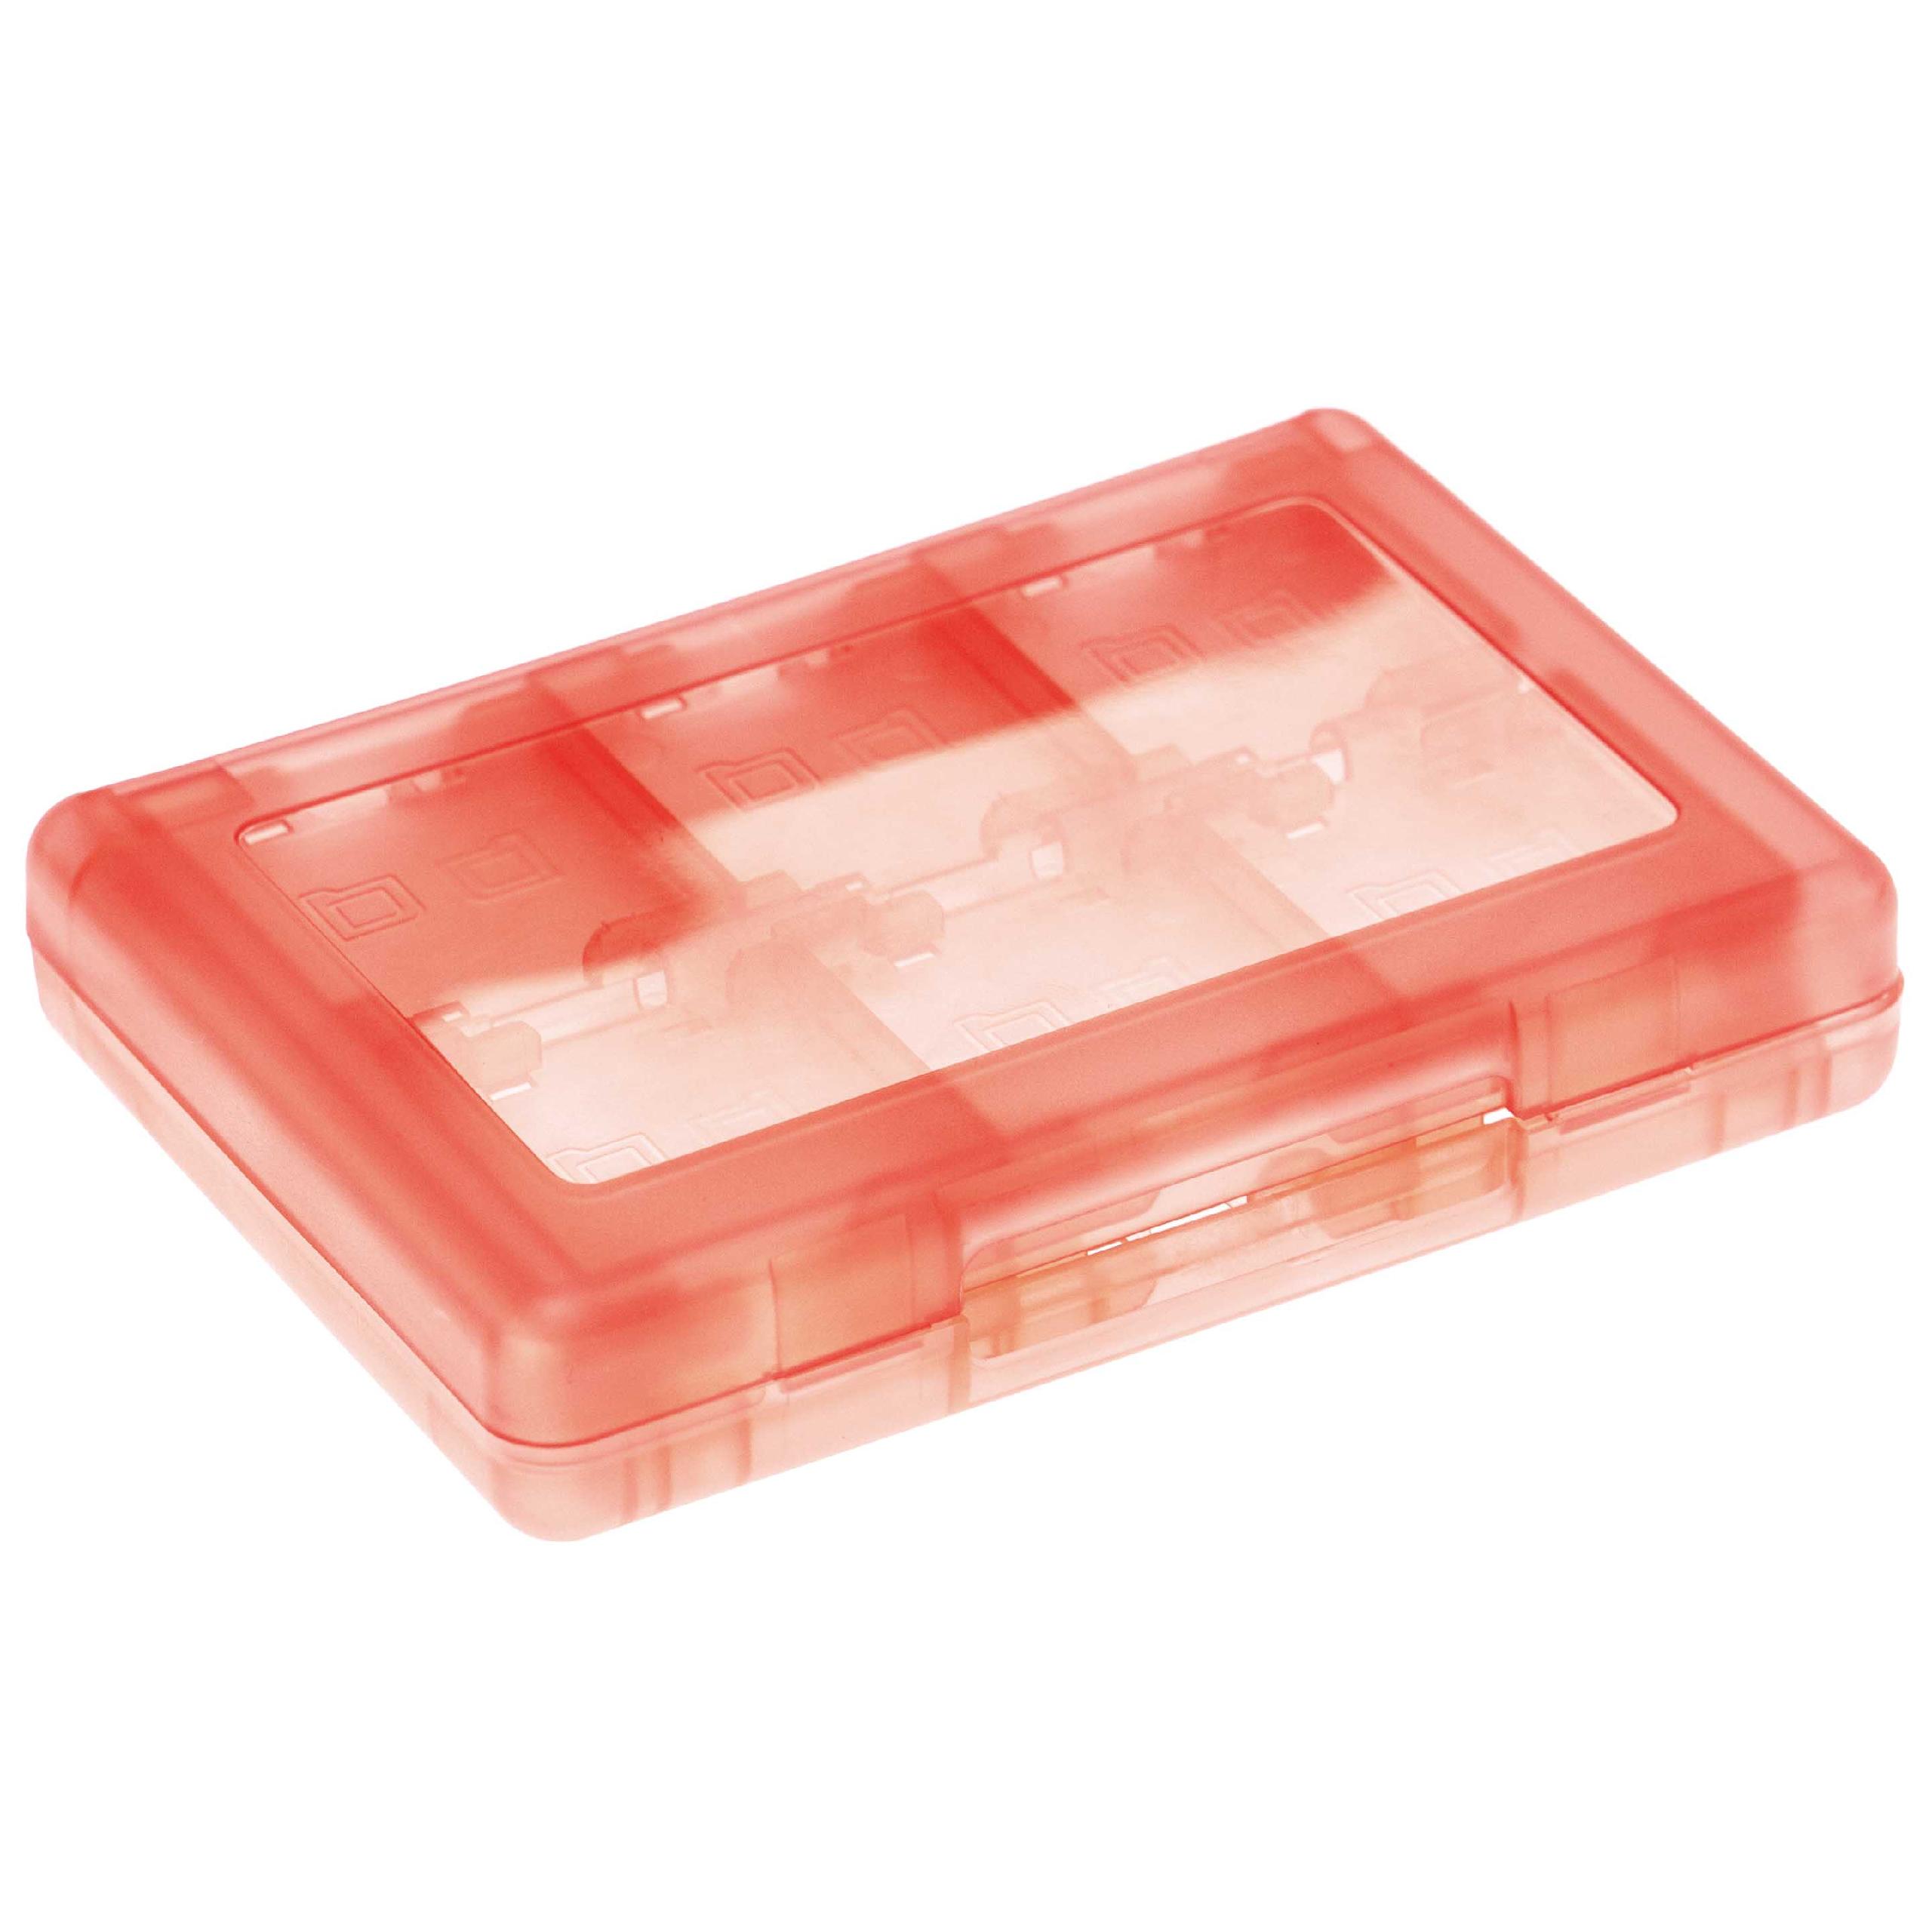 Carry Case for Nintendo Accessories - 3DS, 3DS LL, 3DS XL, DS Lite, DSi, transparent, red